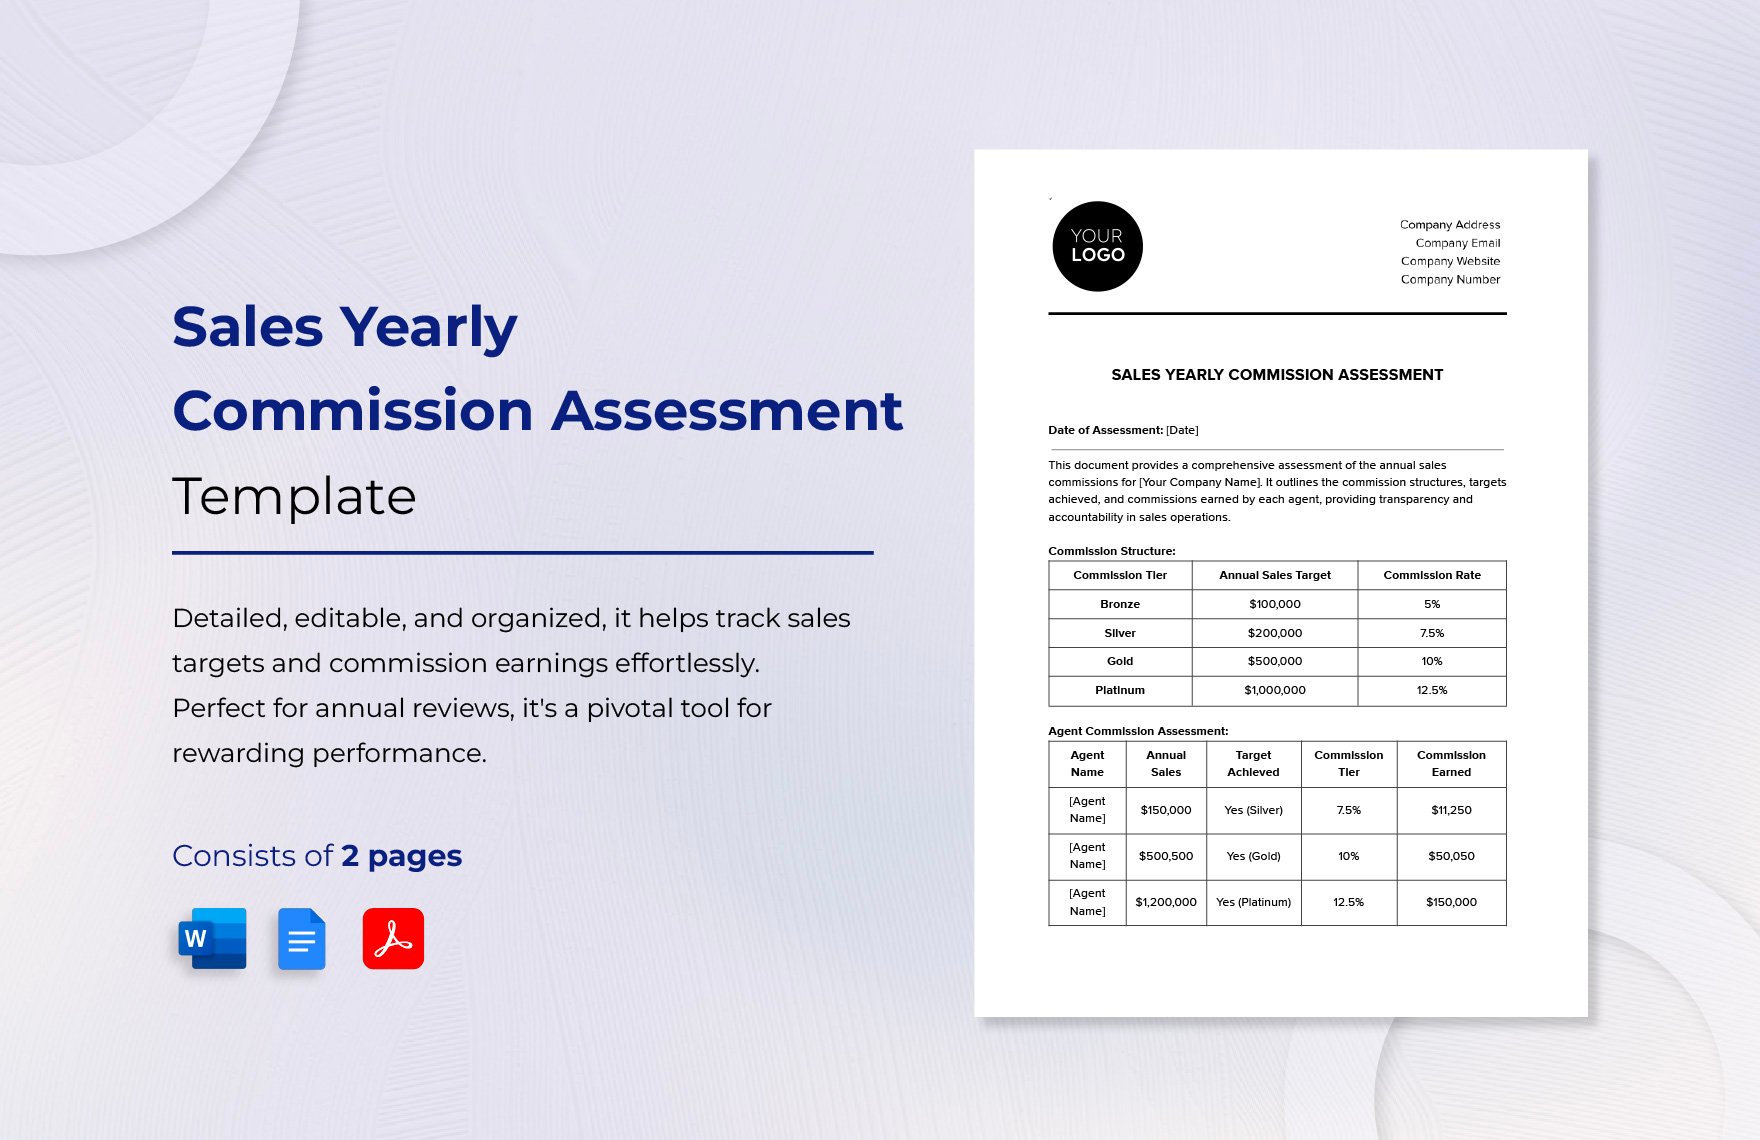 Sales Yearly Commission Assessment Template